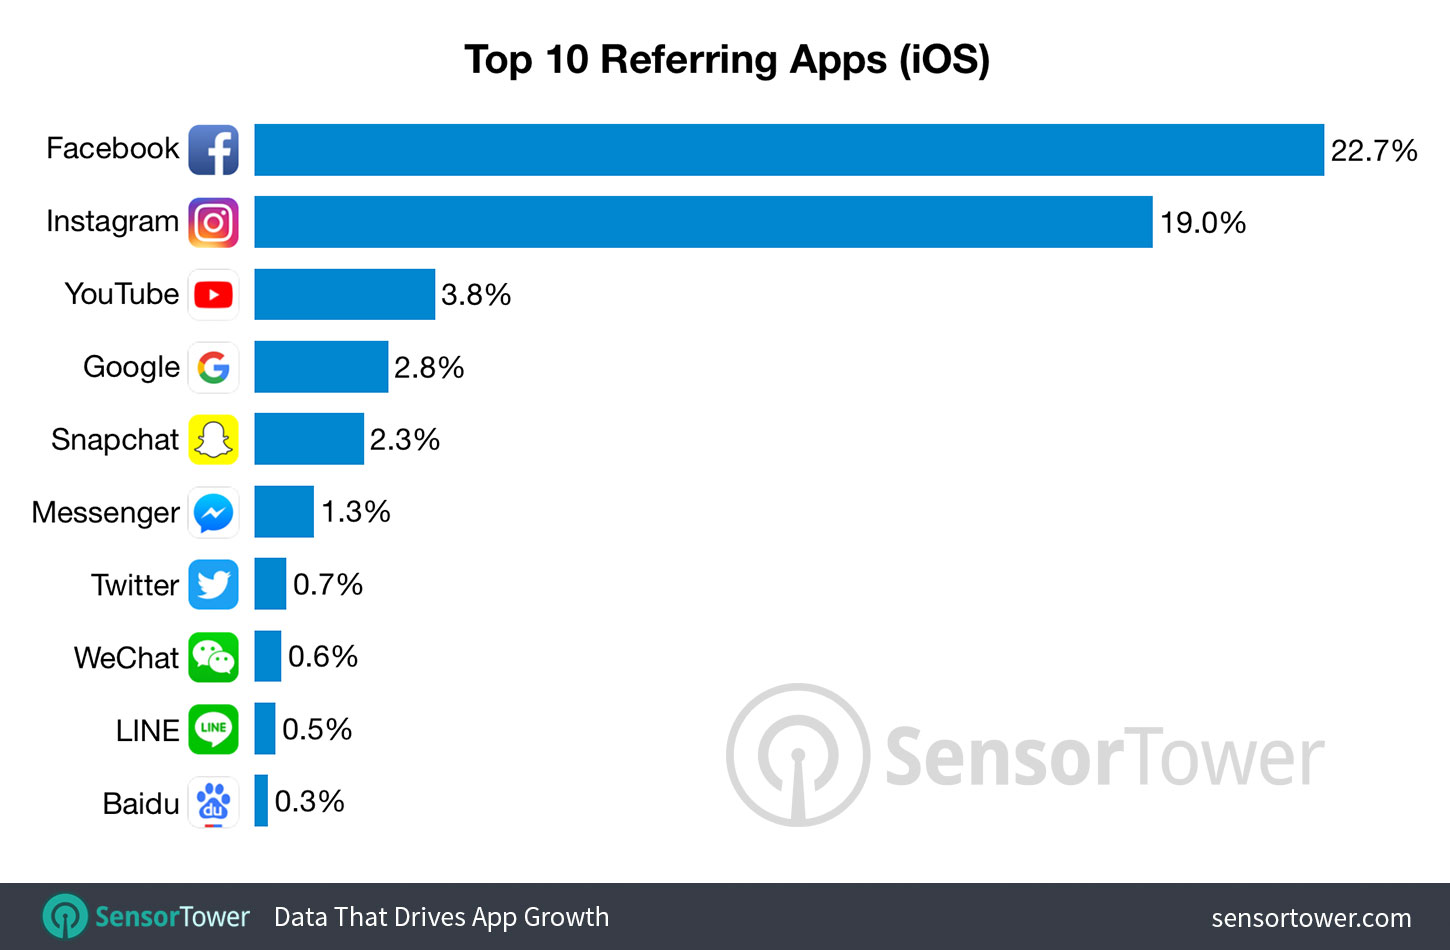 Chart showing the top 10 referring iOS apps by percentage of referral installs between November 2017 and October 2018